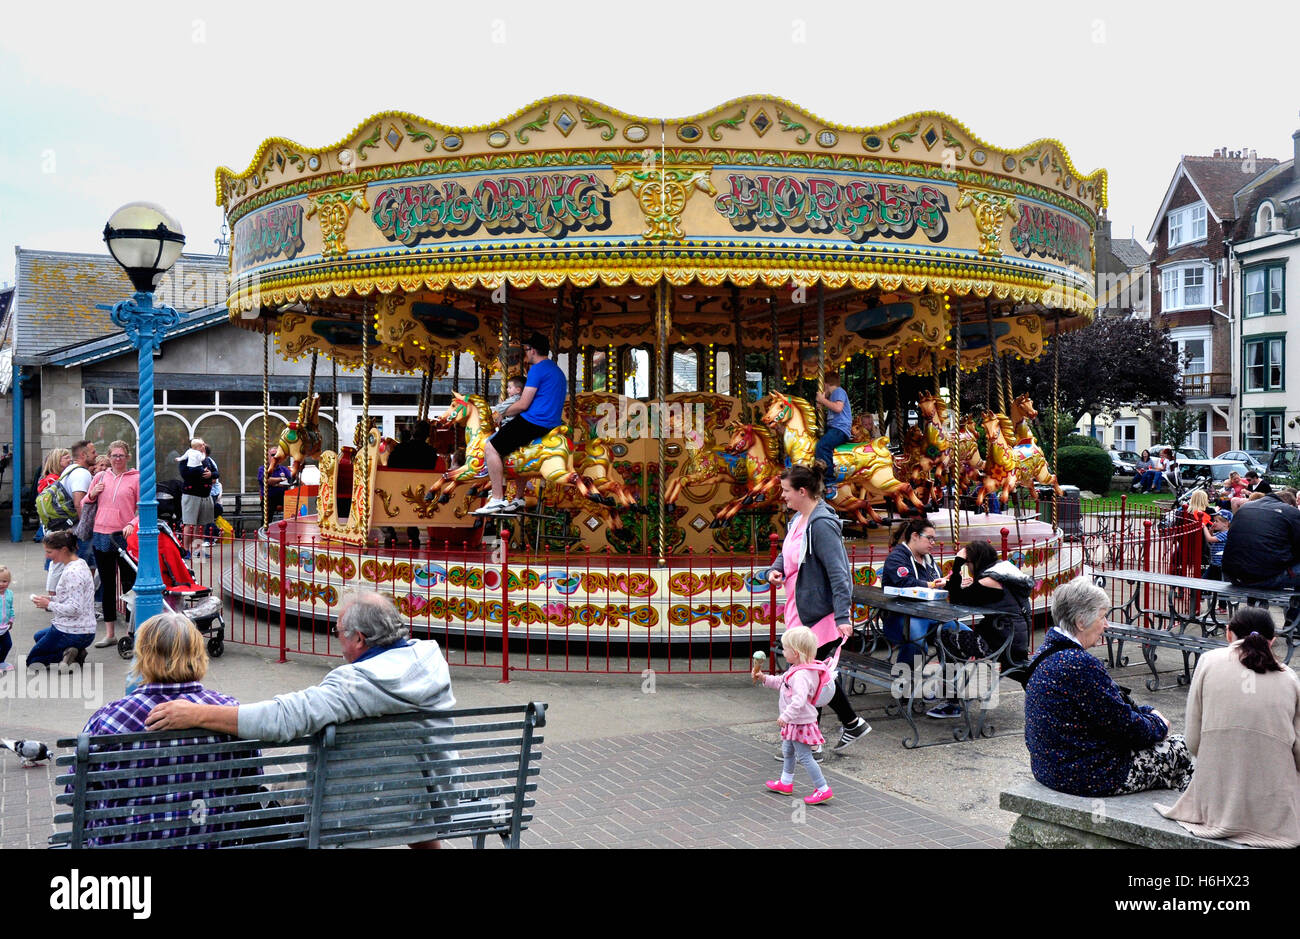 Dorset - Weymouth sea front fairground scene - galloping horses carousel - visitors having fun - colour and movement - holidays Stock Photo